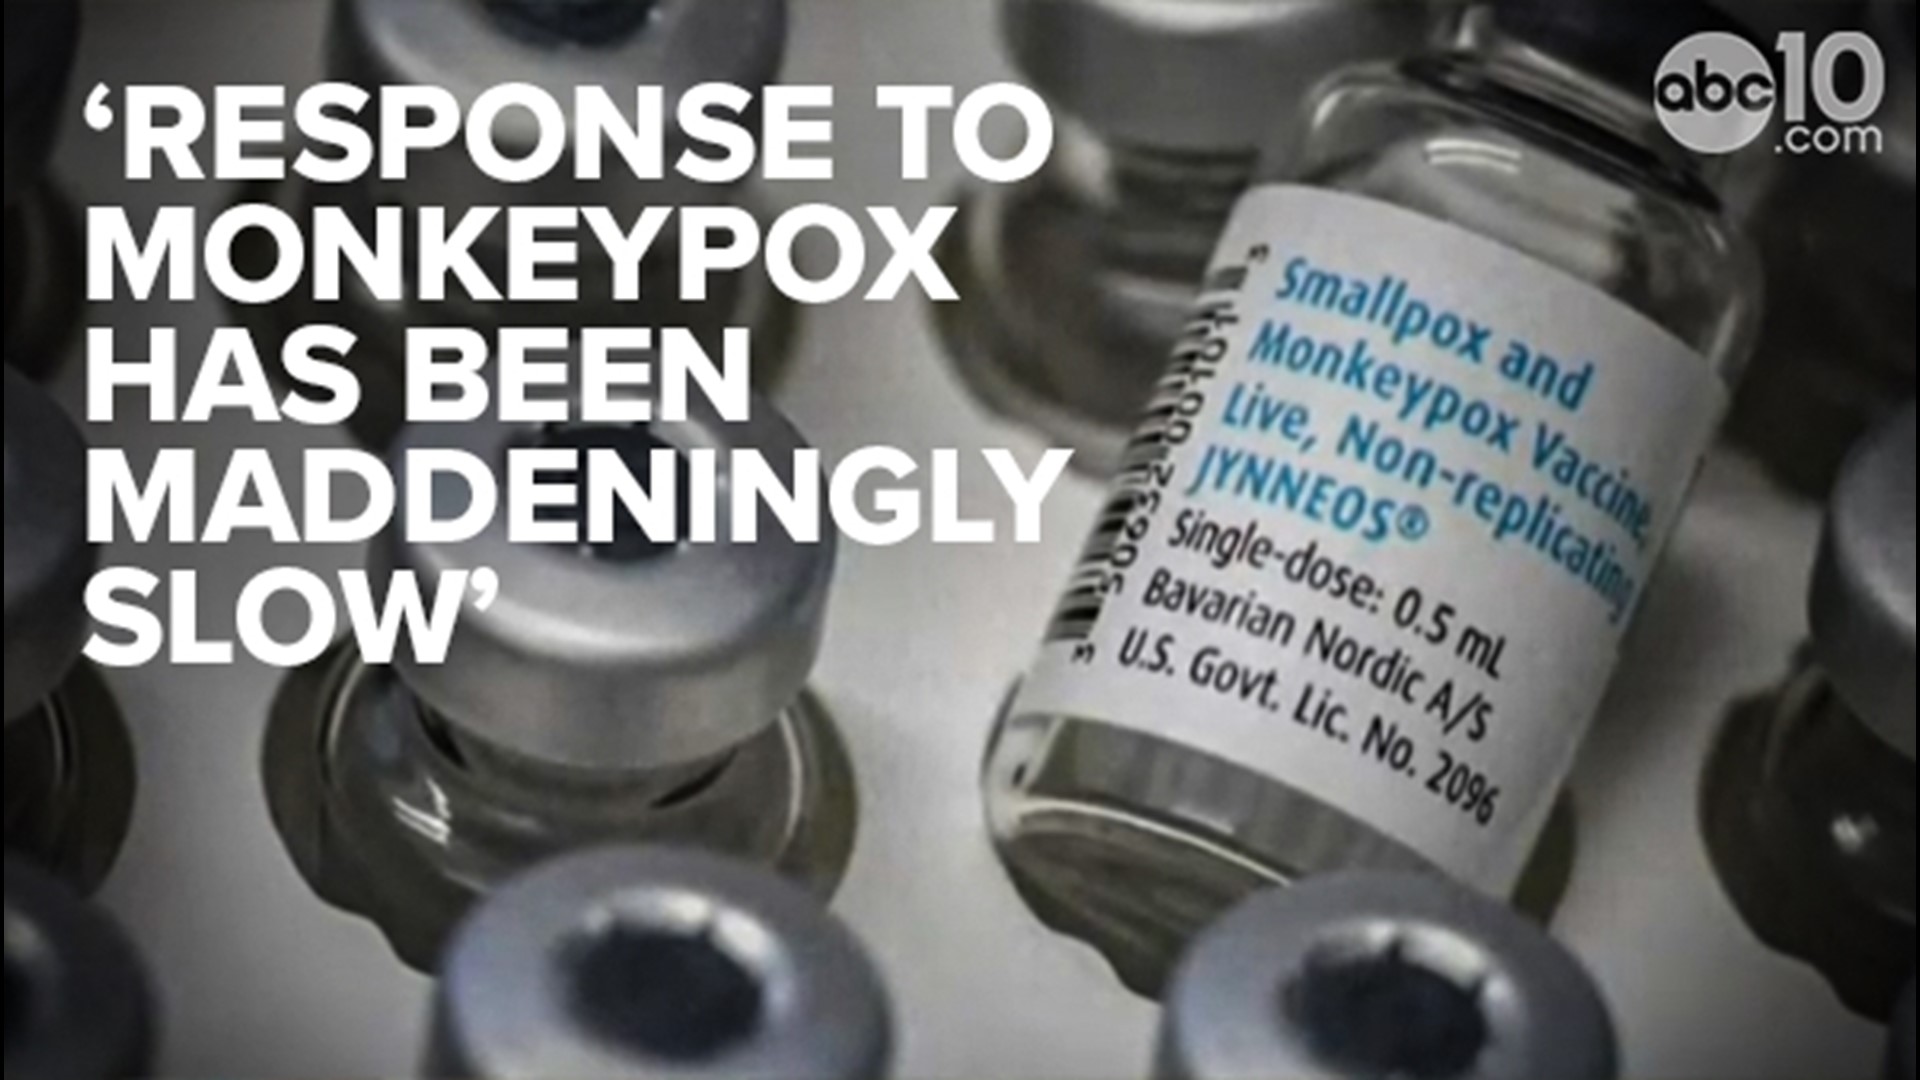 Sacramento has seen 22 cases of Monkeypox so far, and experts say the virus outbreak has been negatively impacting the gay community.